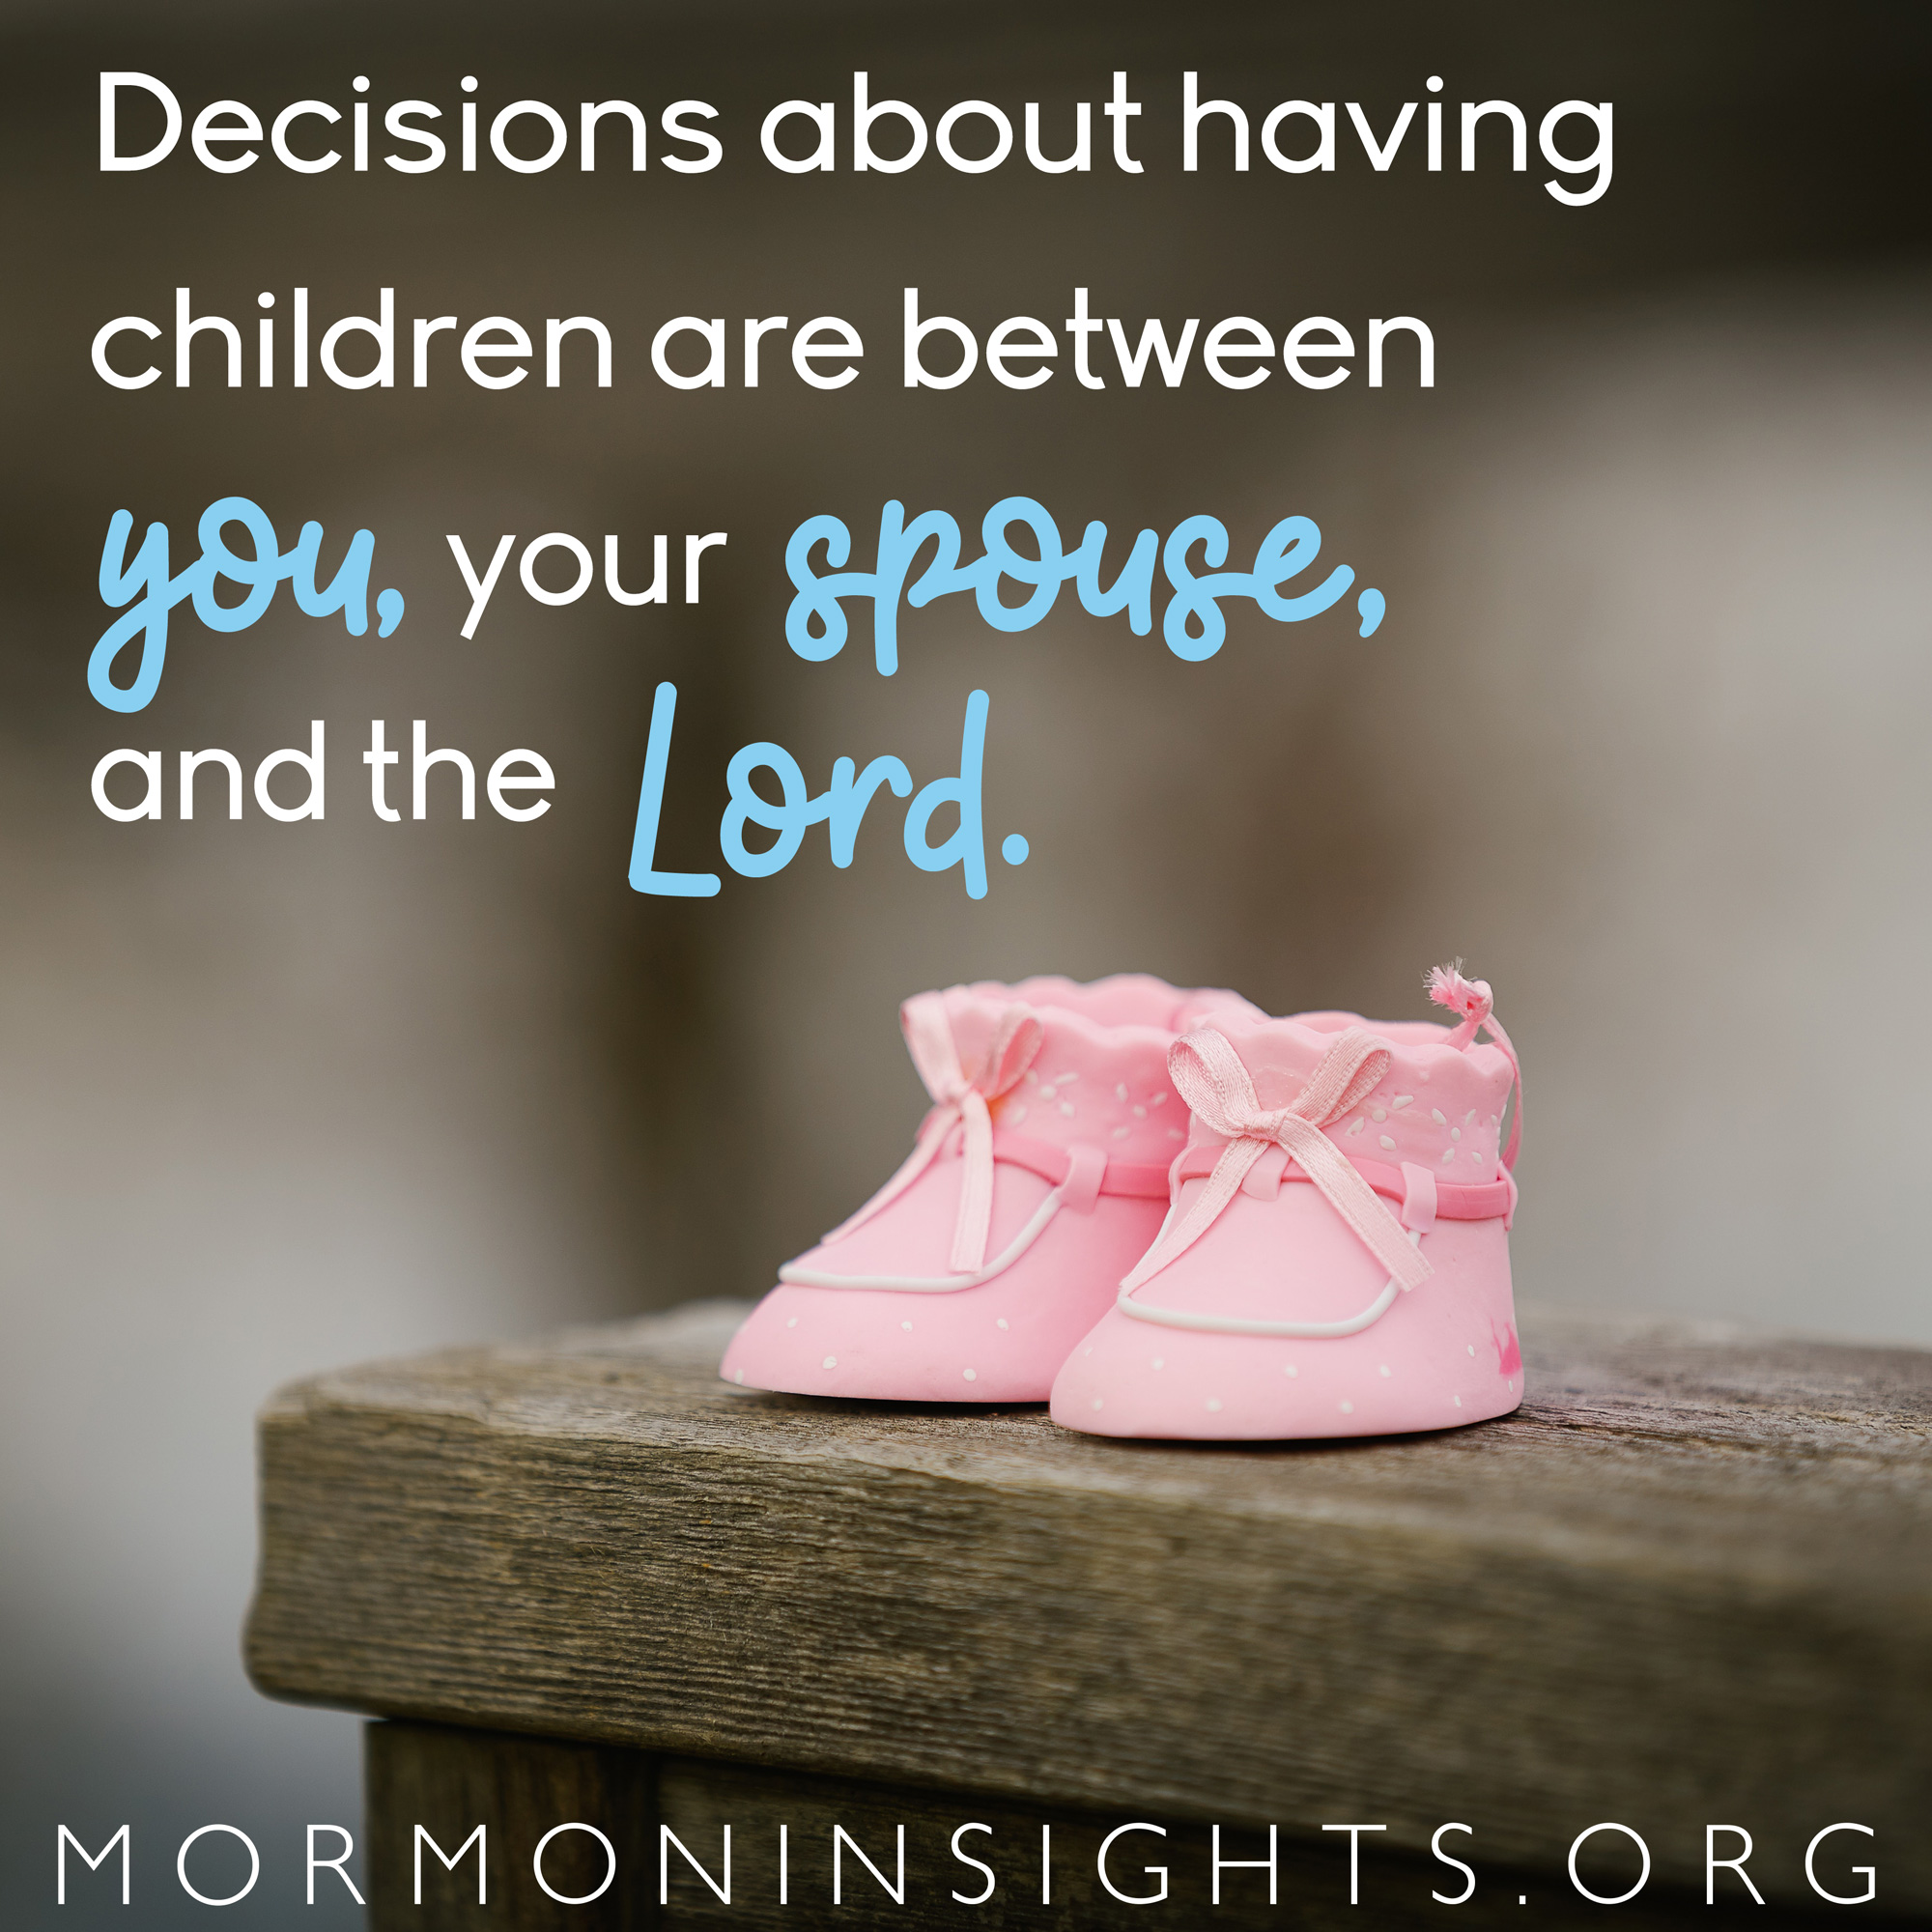 Decisions about having children are between you, your spouse, and the Lord.